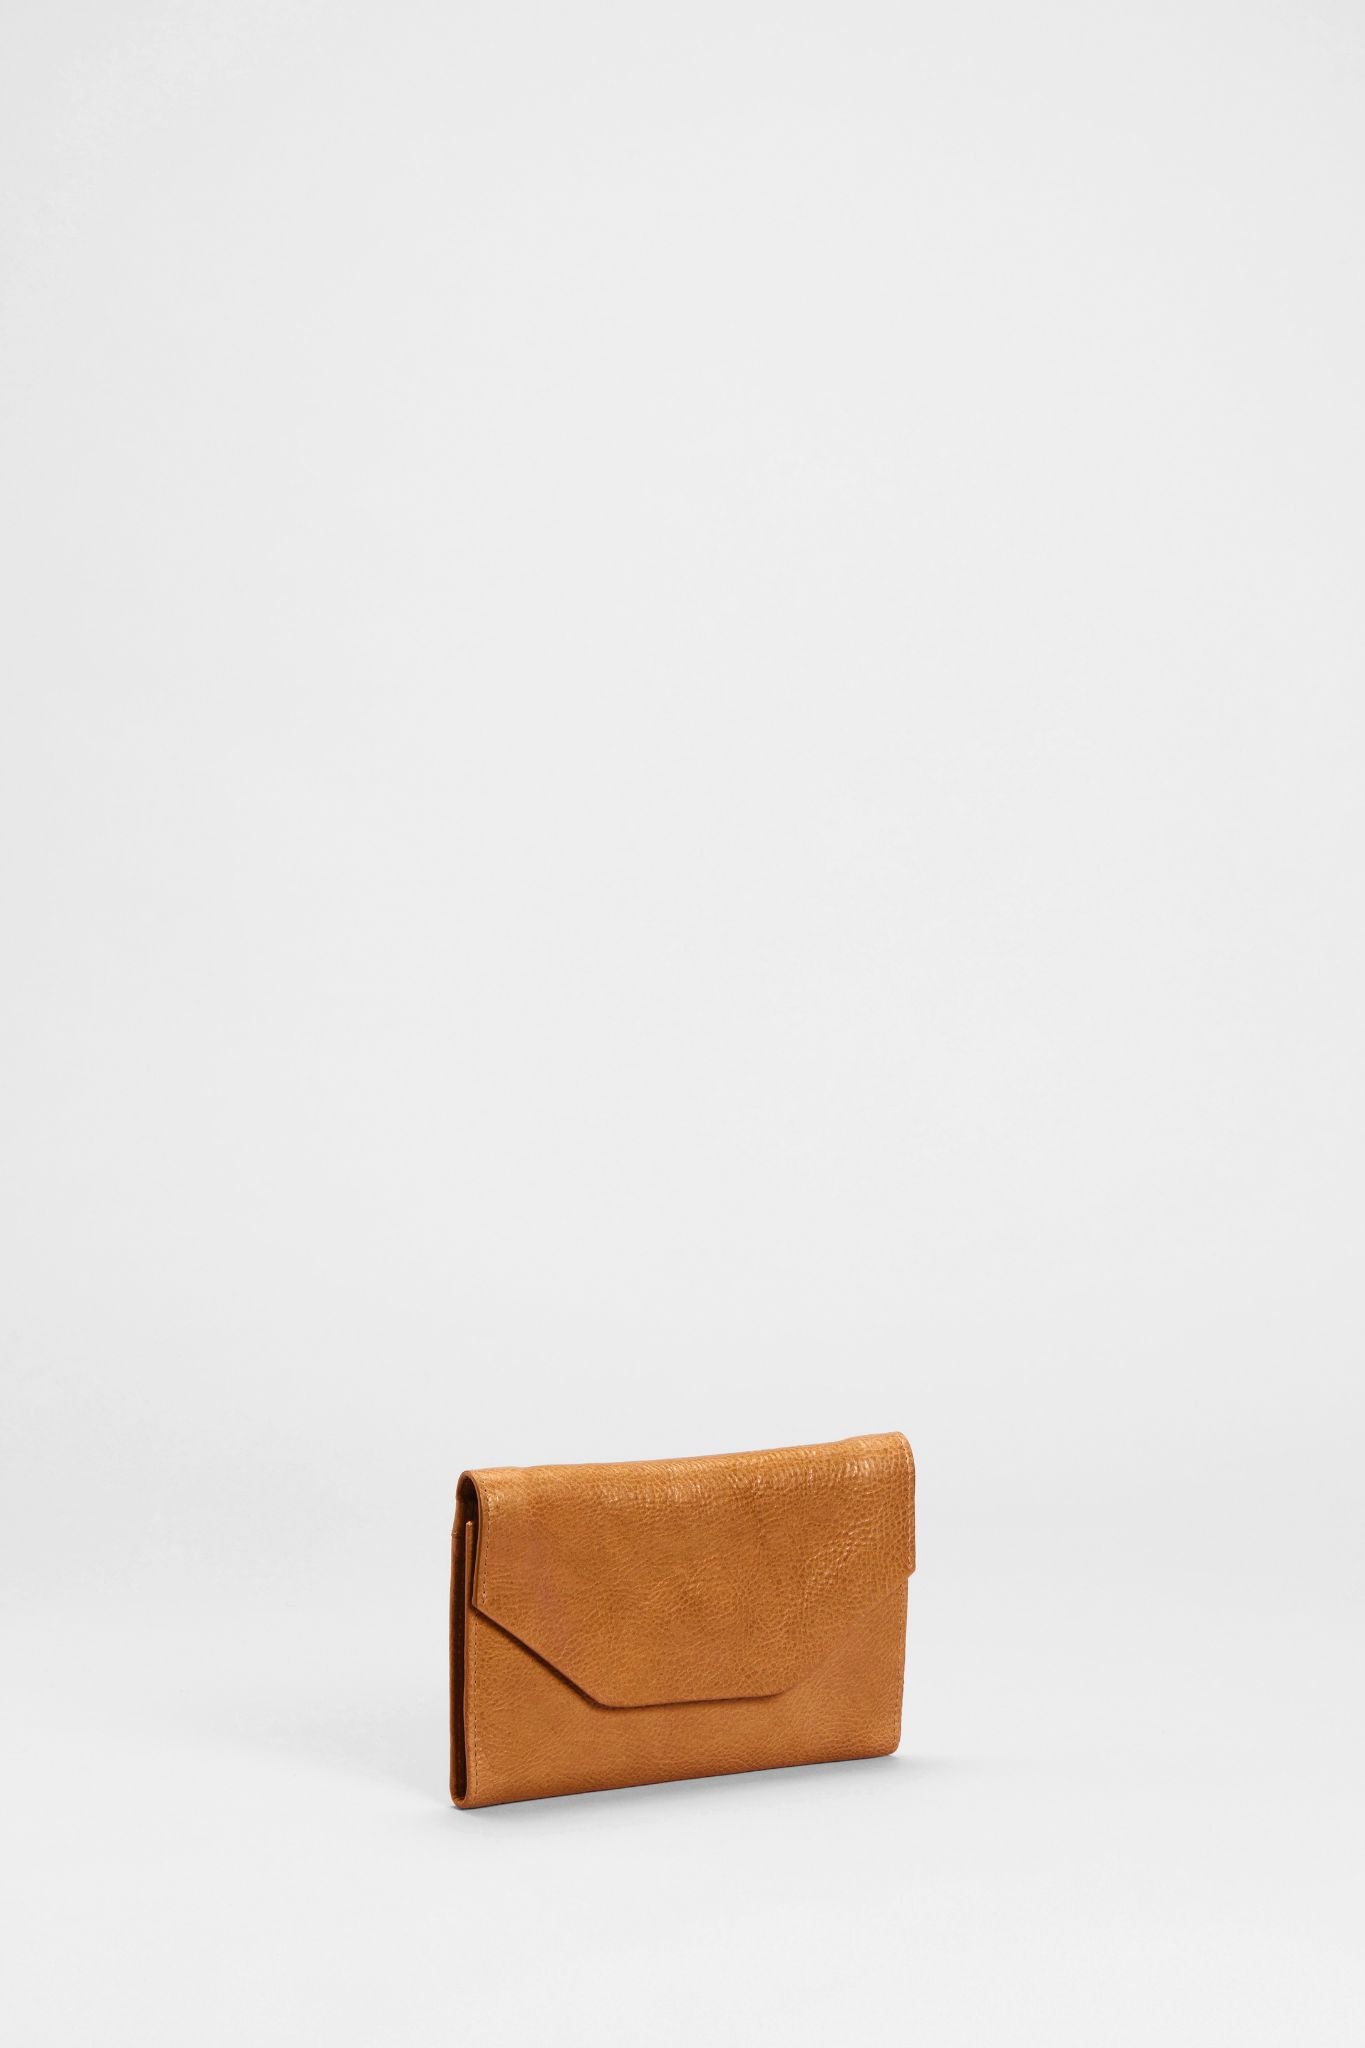 Nuoli Textured Leather Wallet front Honey